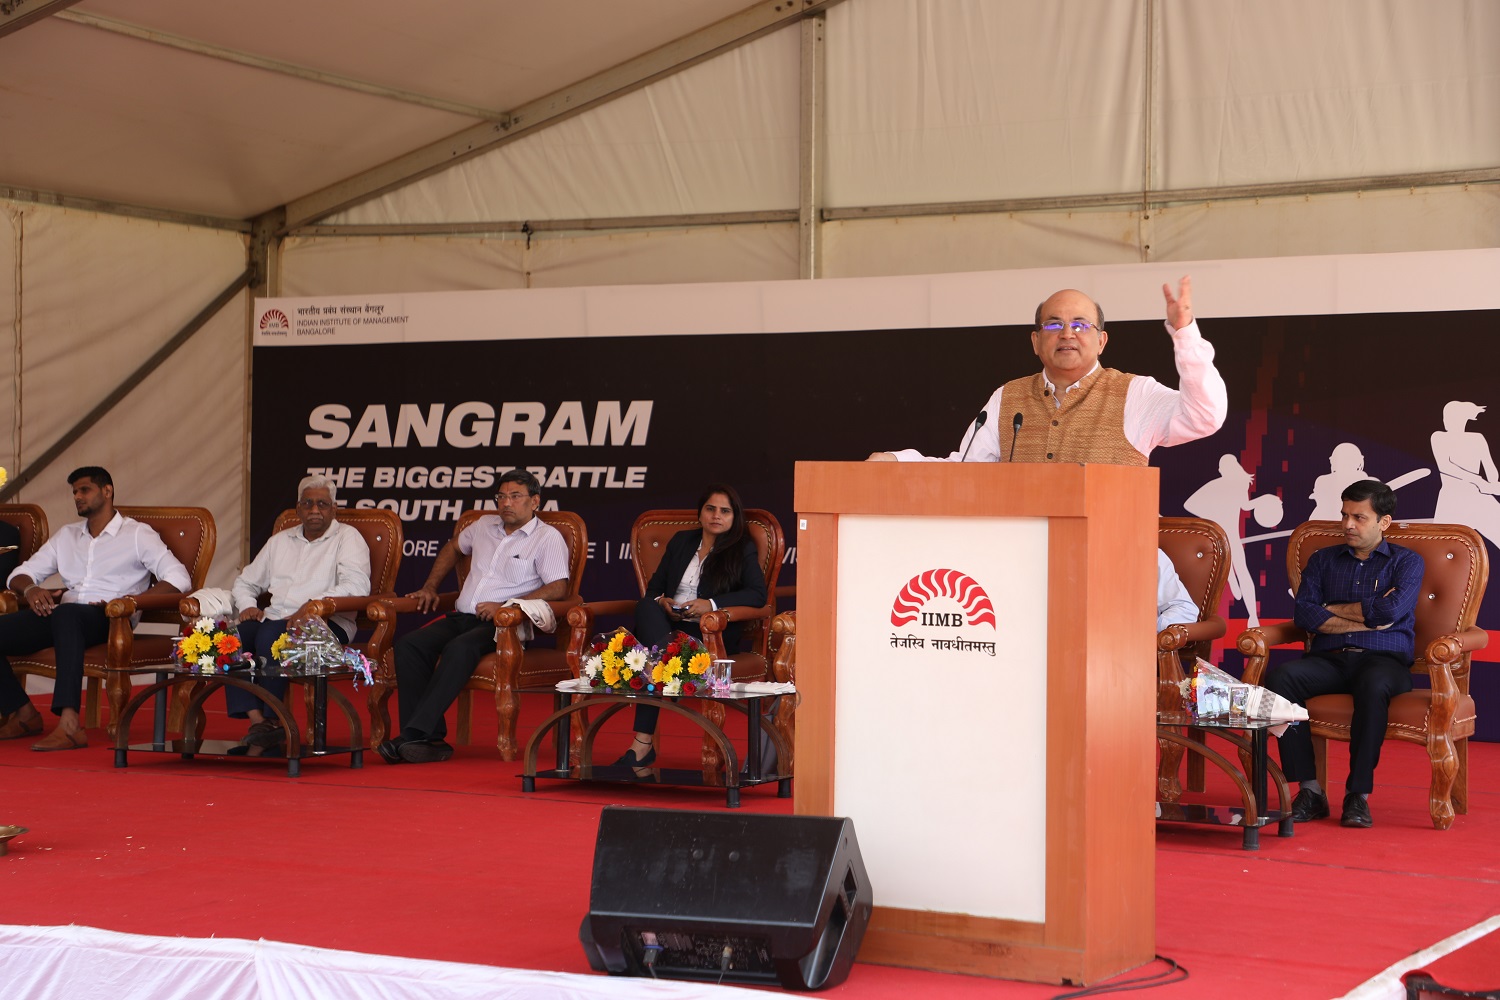 Professor Rishikesha T Krishnan, Director, IIMB, welcomes participants to Sangram 2022 and highlights the importance of fitness and wellbeing.